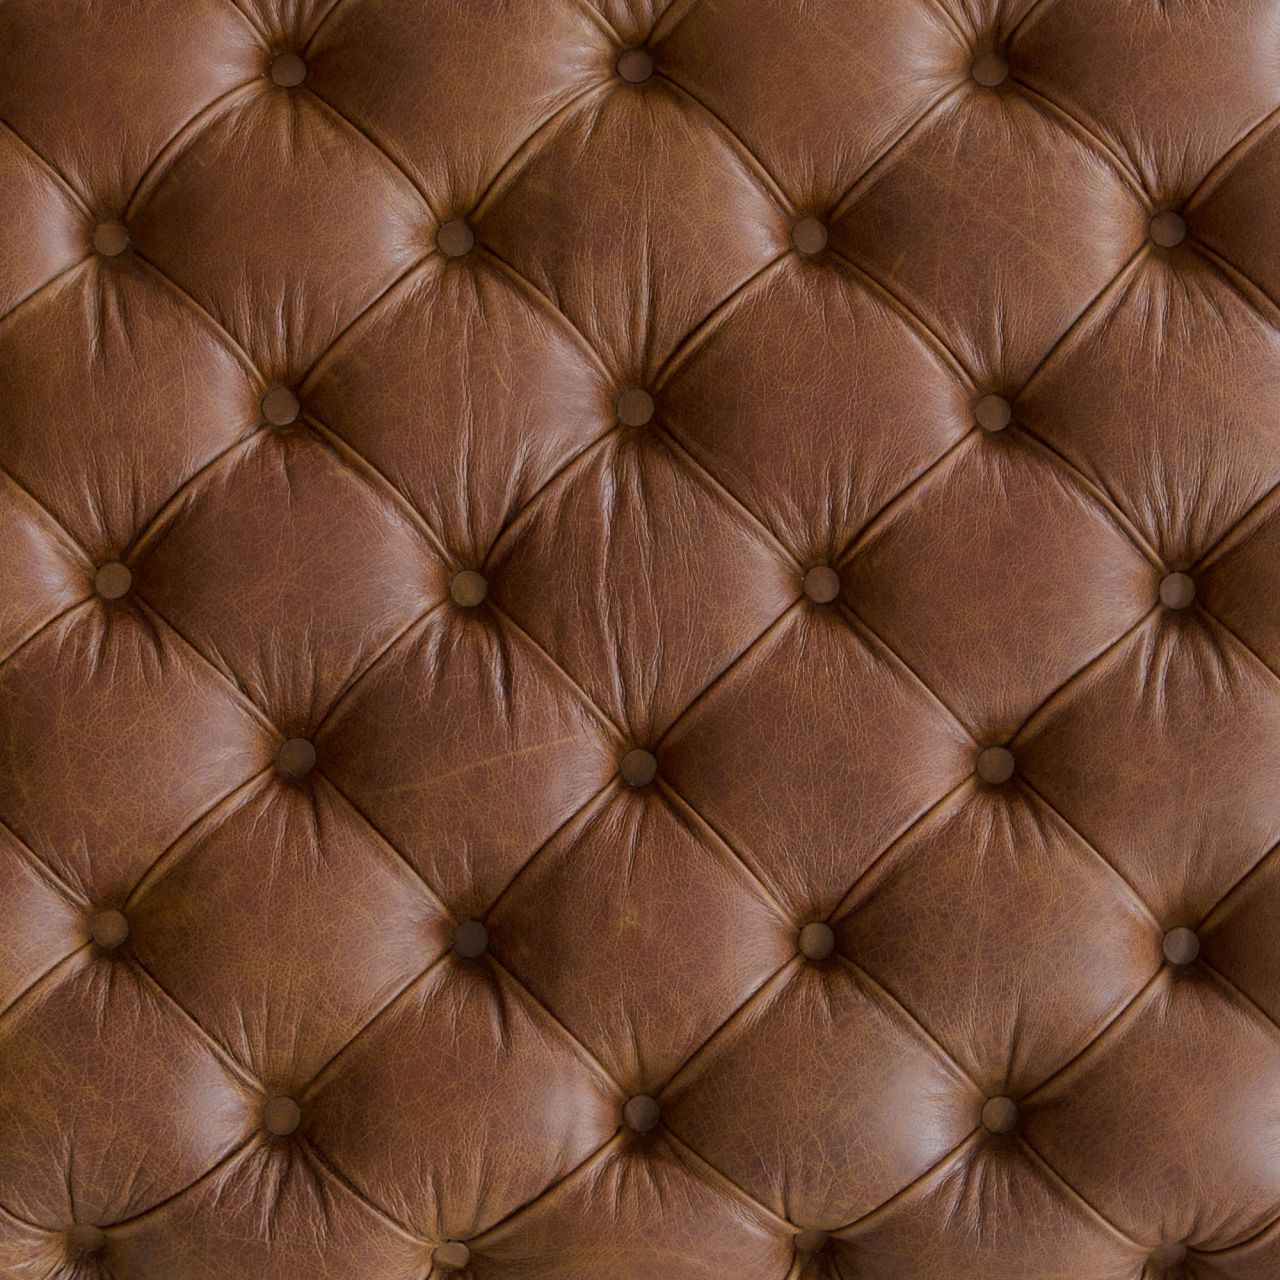 How to Care for your Leather Furniture?